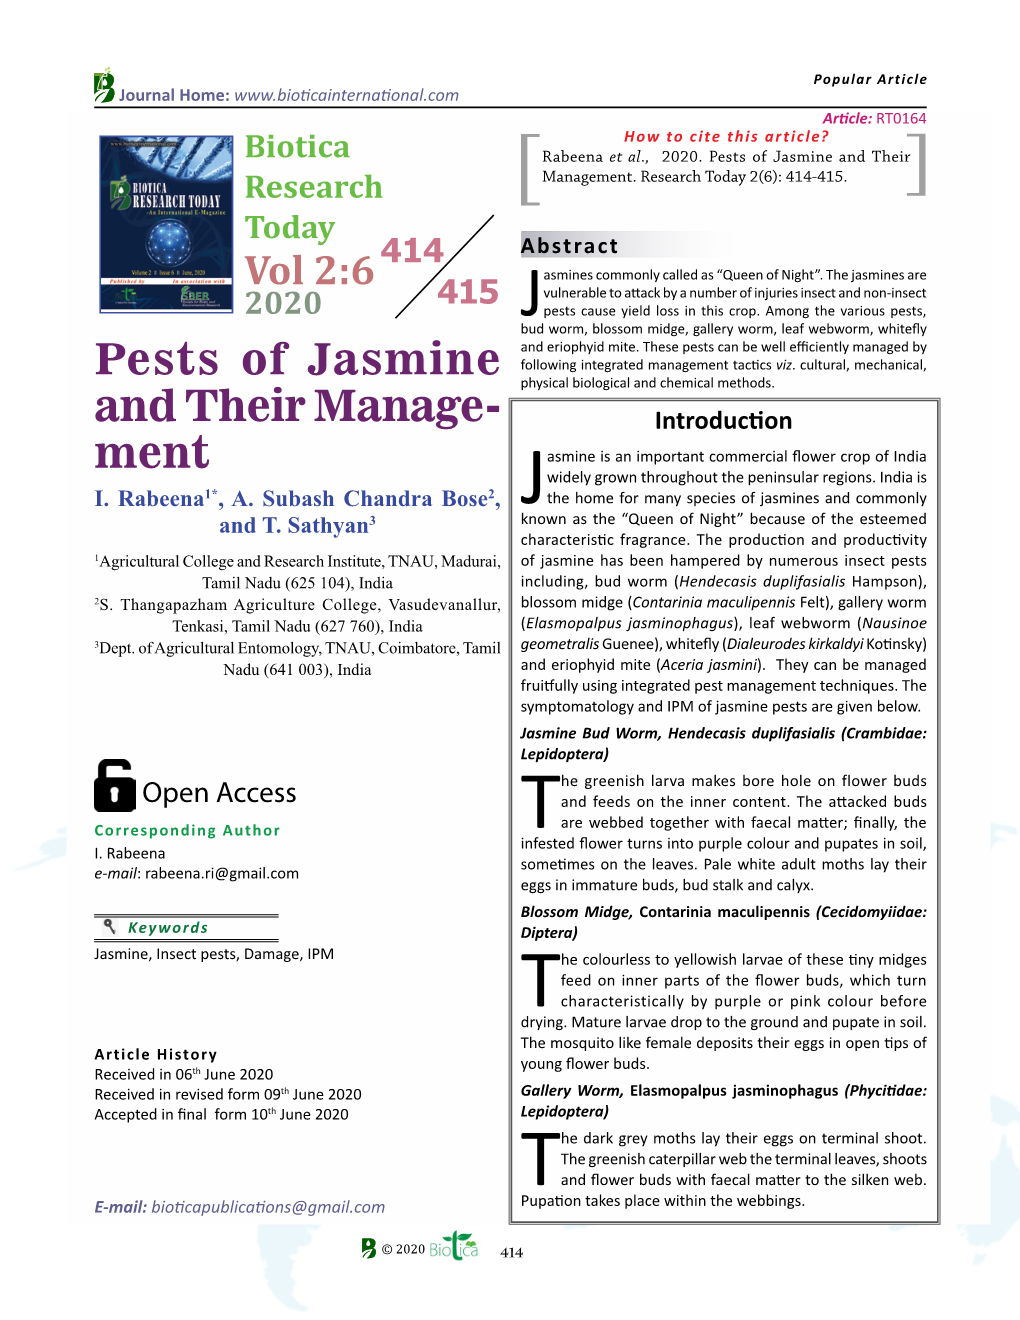 Pests of Jasmine and Their Manage